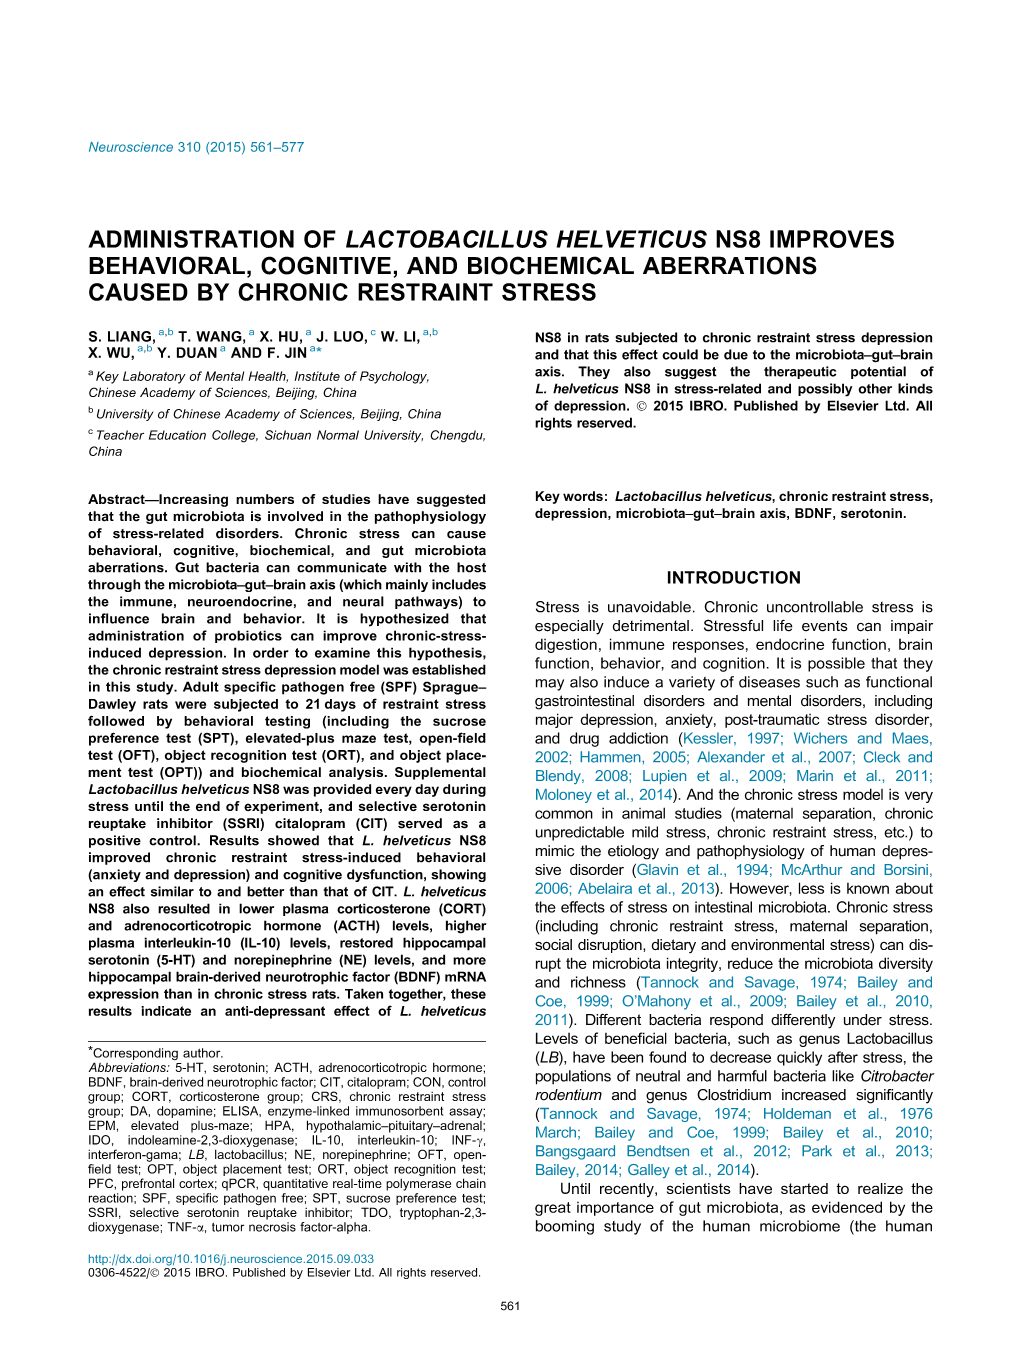 Administration of Lactobacillus Helveticus Ns8 Improves Behavioral, Cognitive, and Biochemical Aberrations Caused by Chronic Restraint Stress